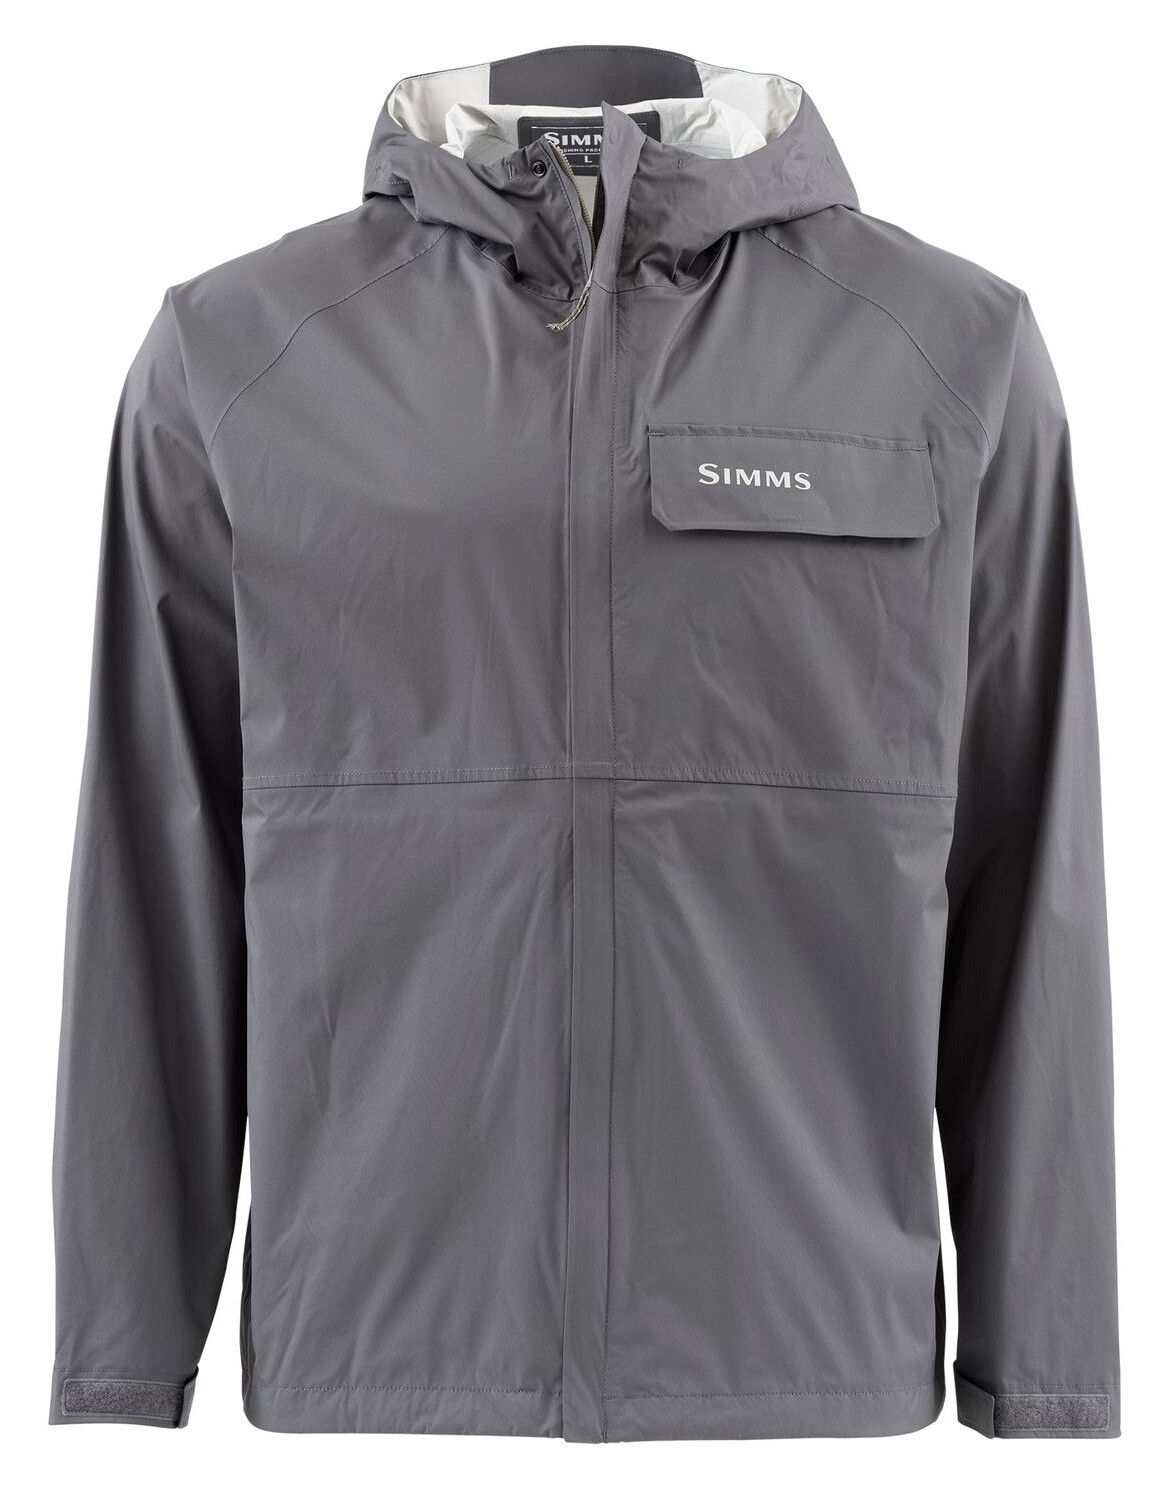 https://www.czechnymph.com/data/web/auto-imported-products/simms/simms-waypoints-jacket-899cb521.jpg